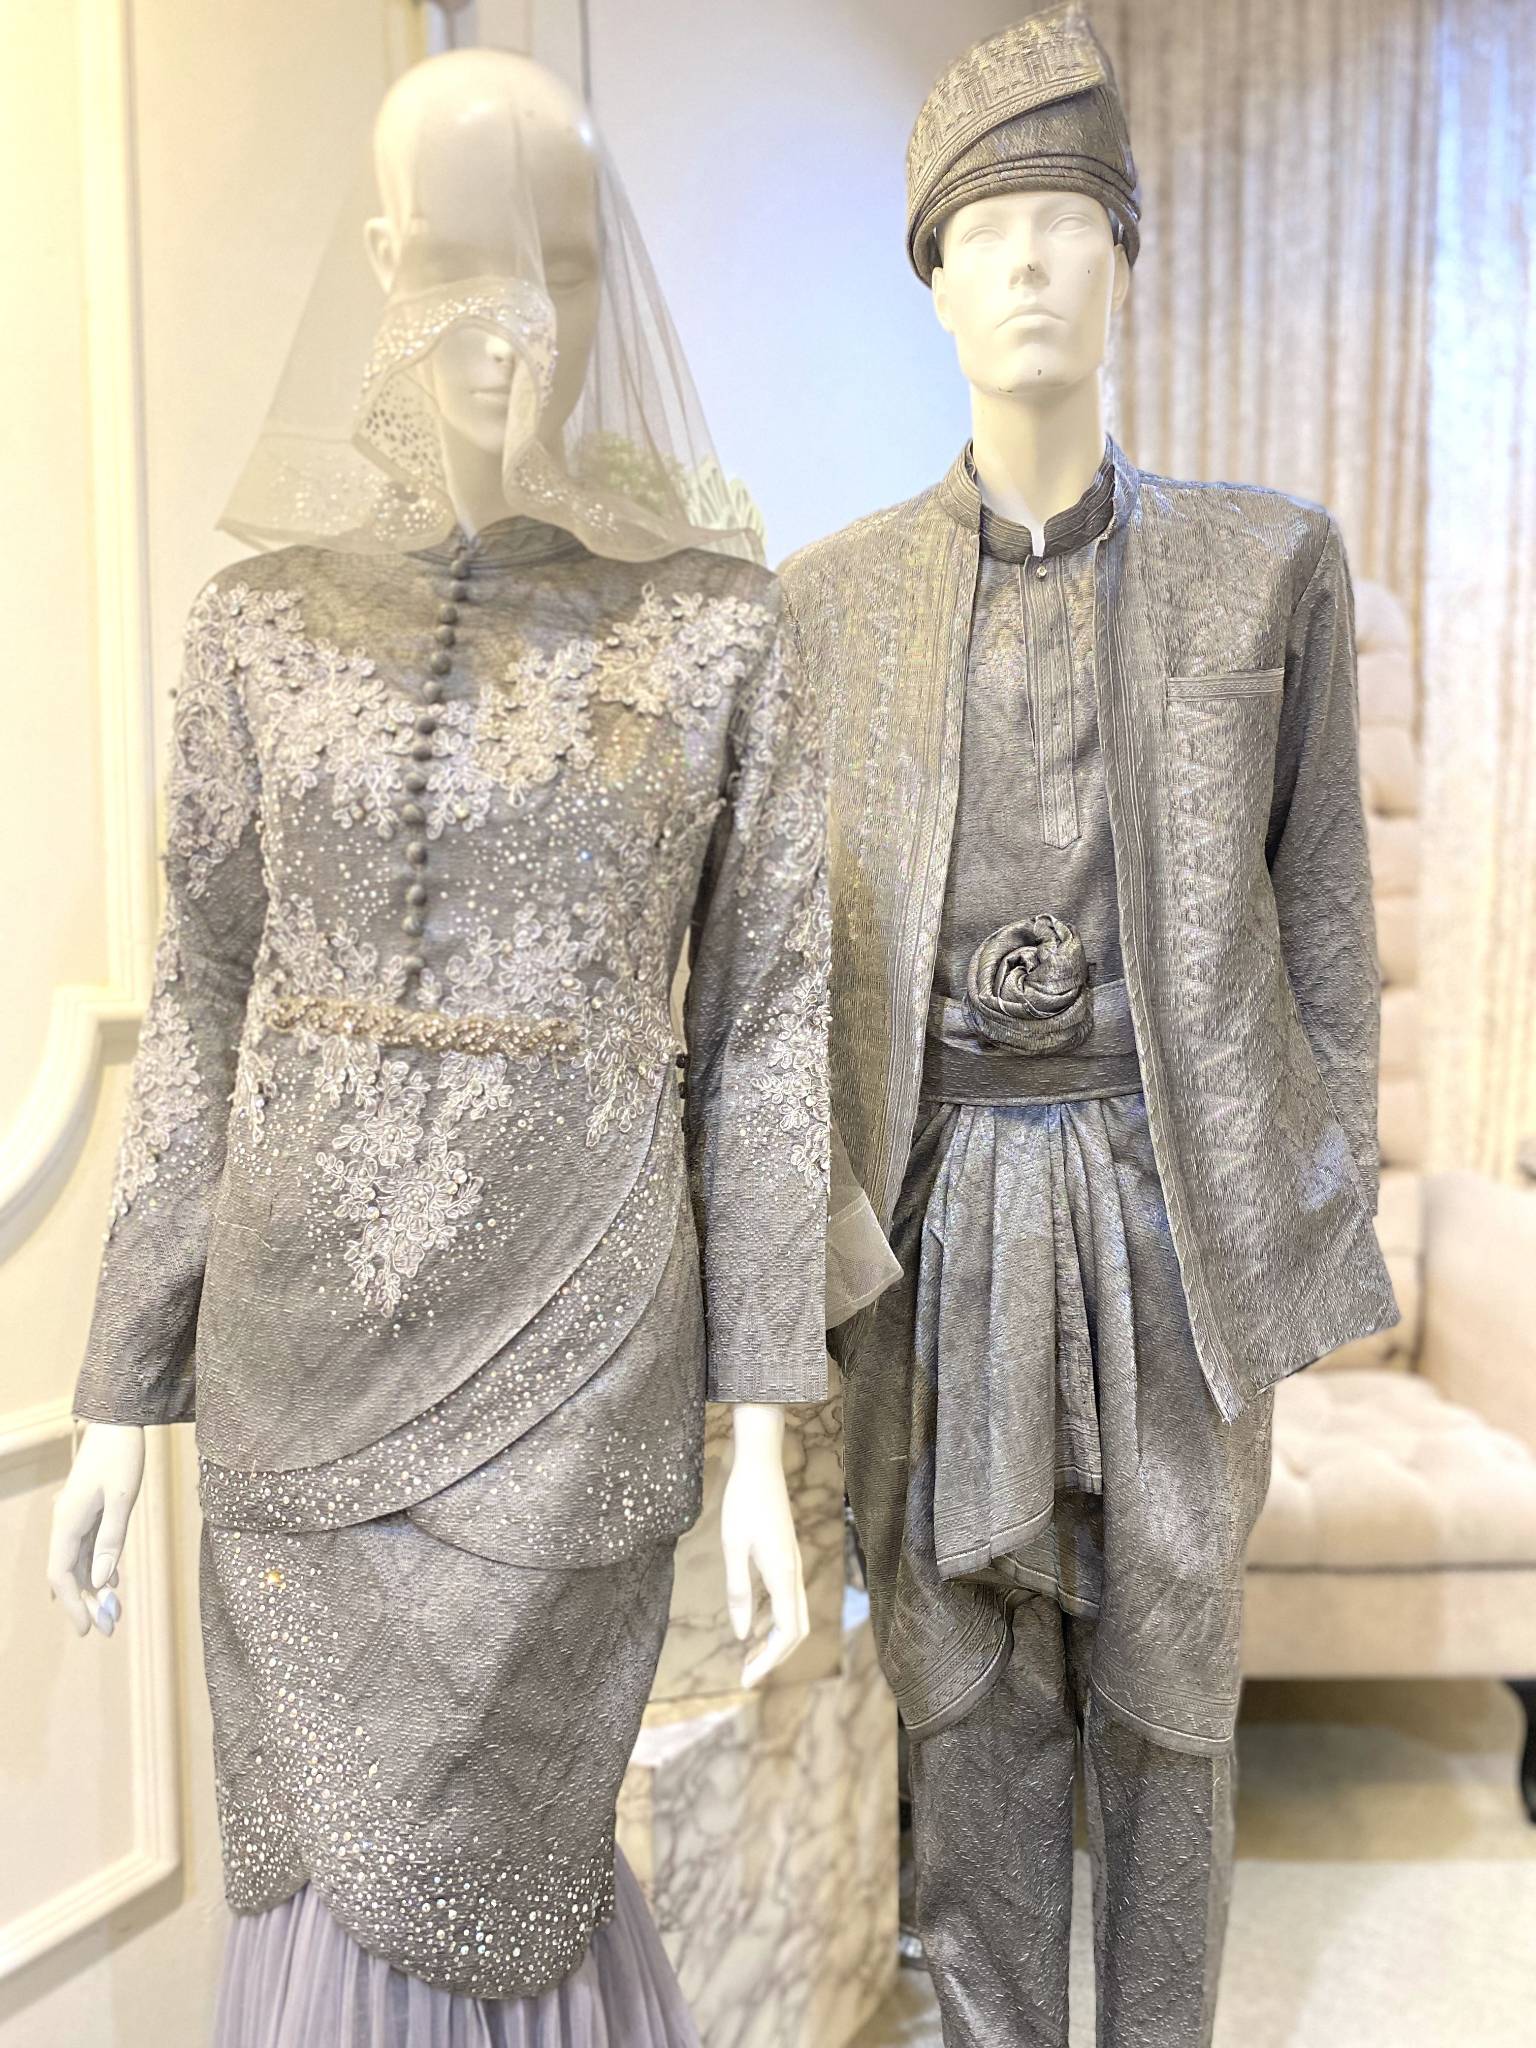 Two-piece Malay wedding dress in songket fabric in dark grey and silver. The top is a tulip-style top with a sweetheart neckline and off-the-shoulder sleeves. The skirt is a full-length skirt with a slit up the side. The dress is embellished with delicate silver embroidery.